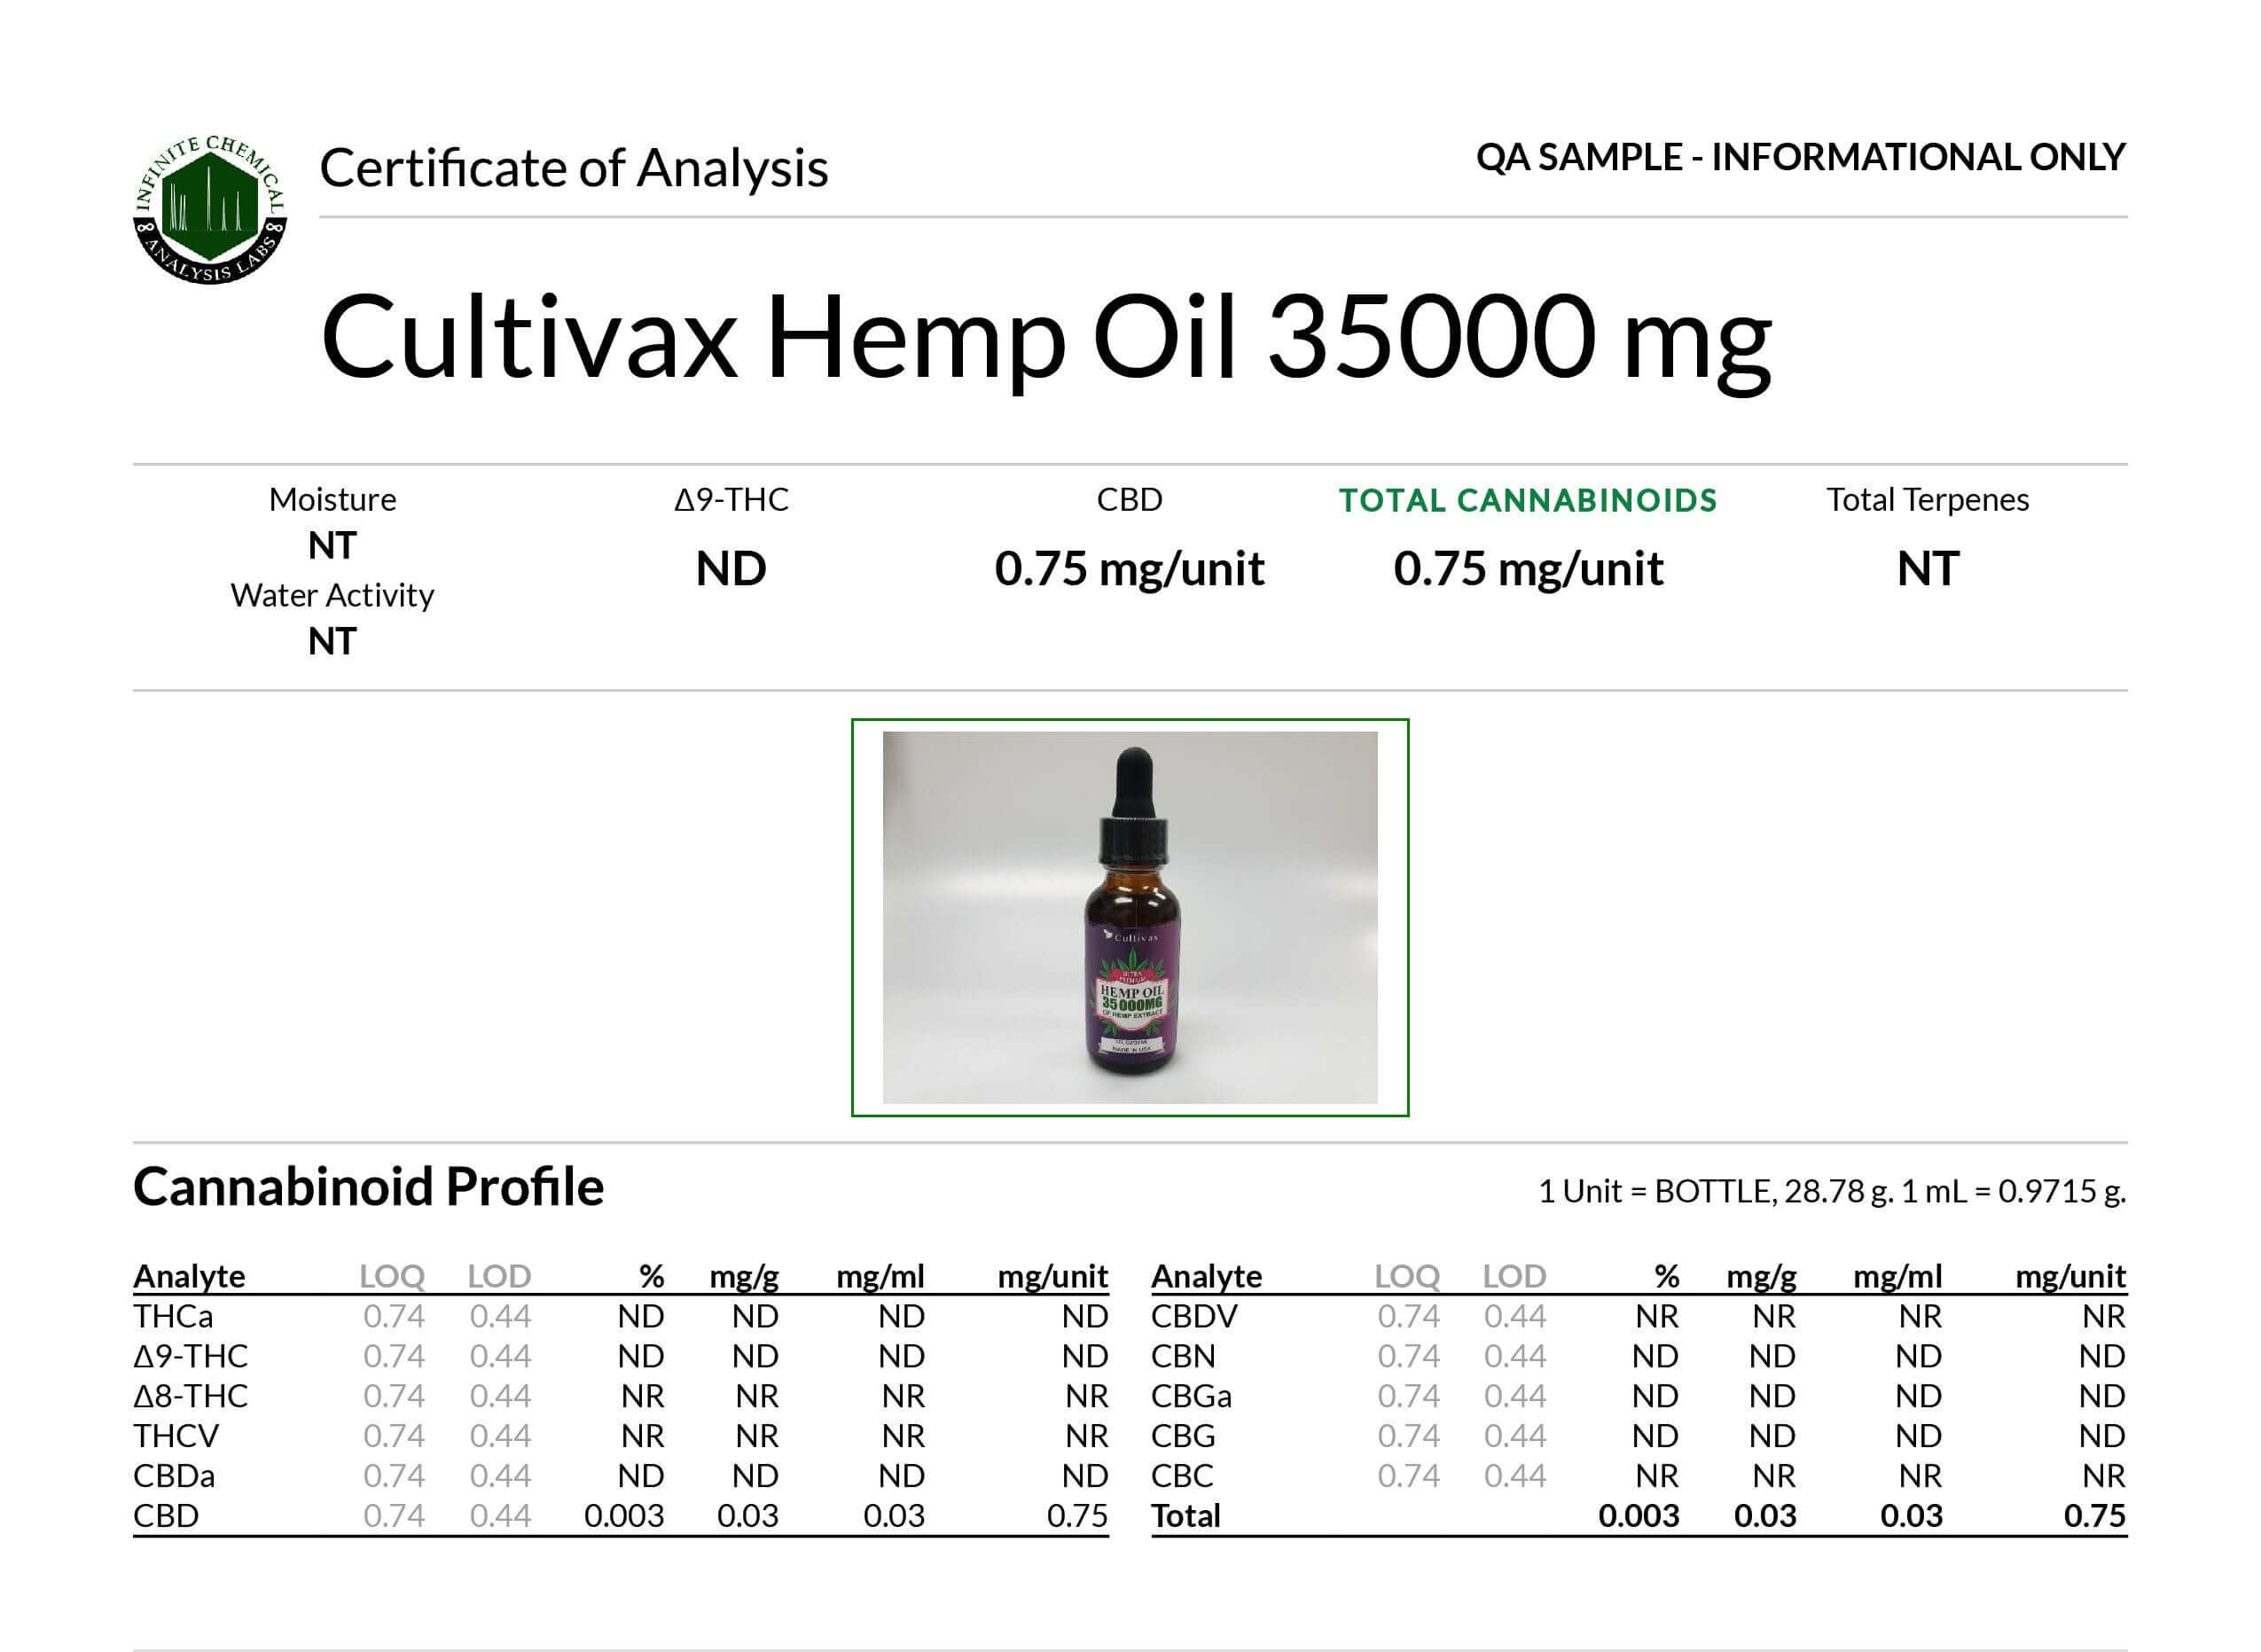 Lab results for Cultivax Hemp Oil 35000 mg